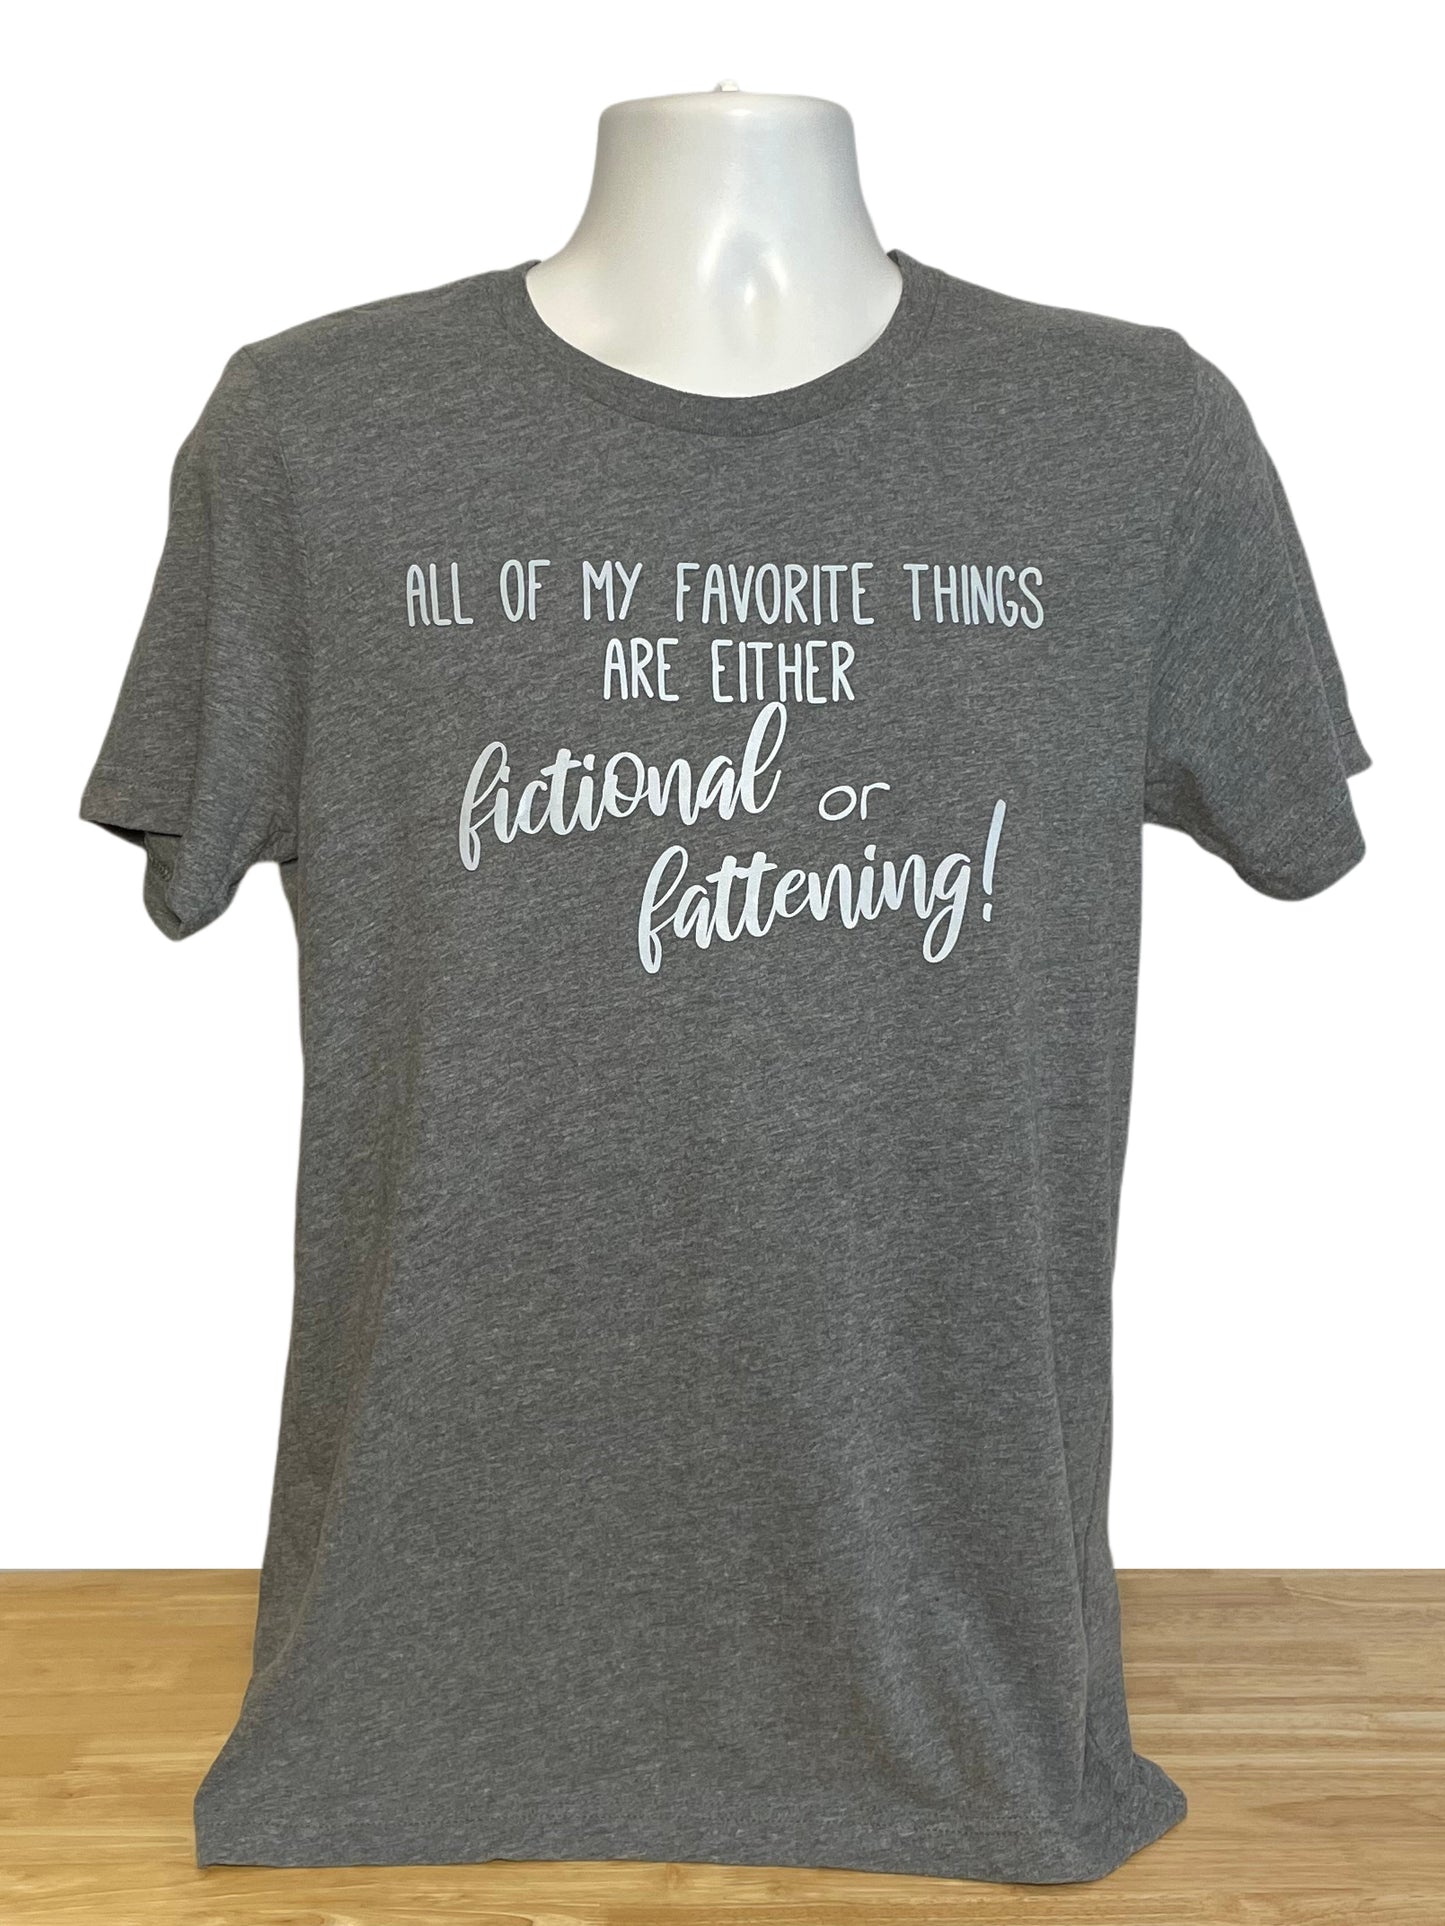 All My Favorite Things are Either Fictional or Fattening T-shirt